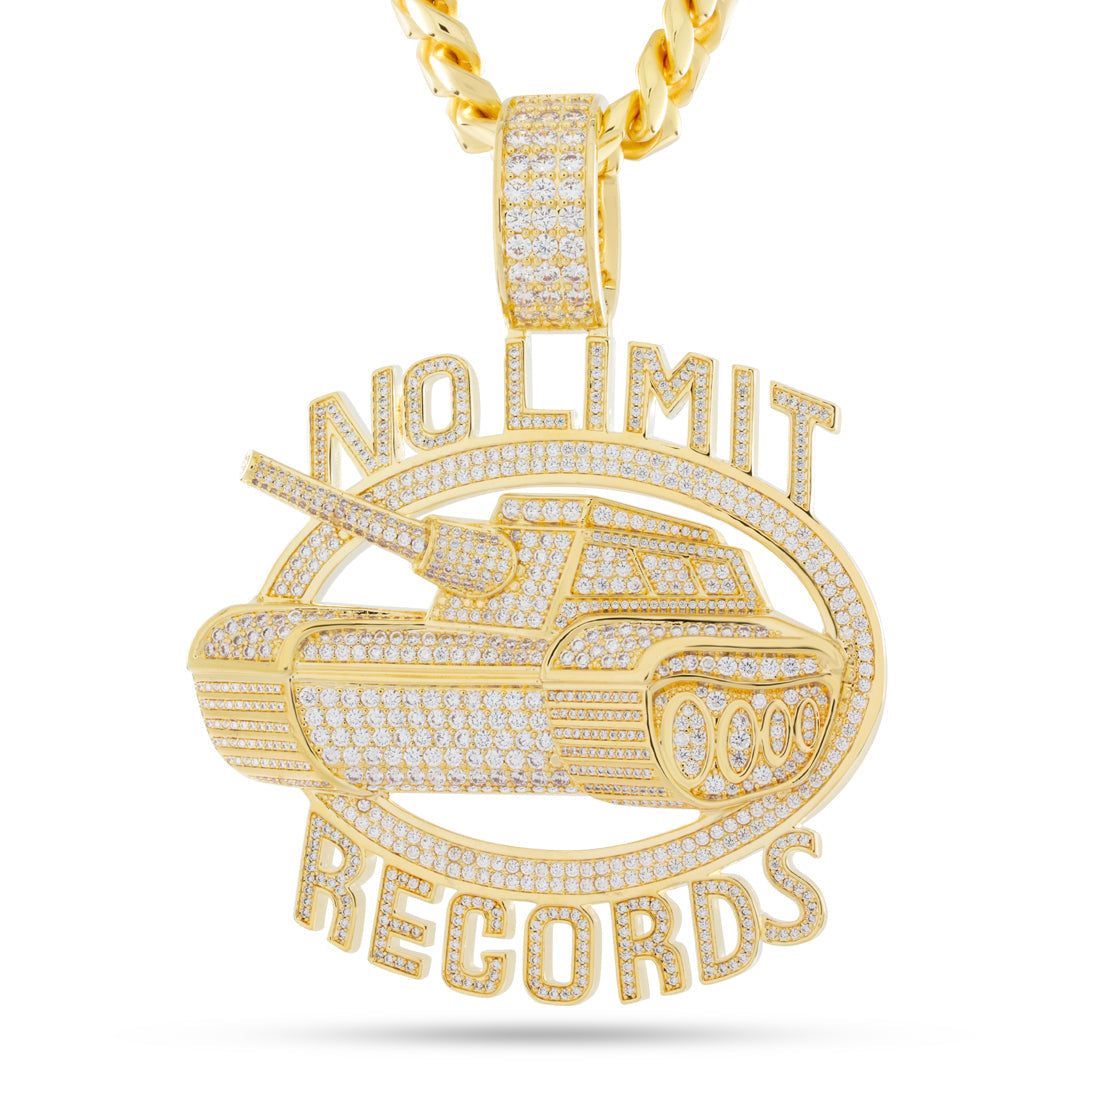 No Limit Records x King Ice - Iced 98 Logo Necklace